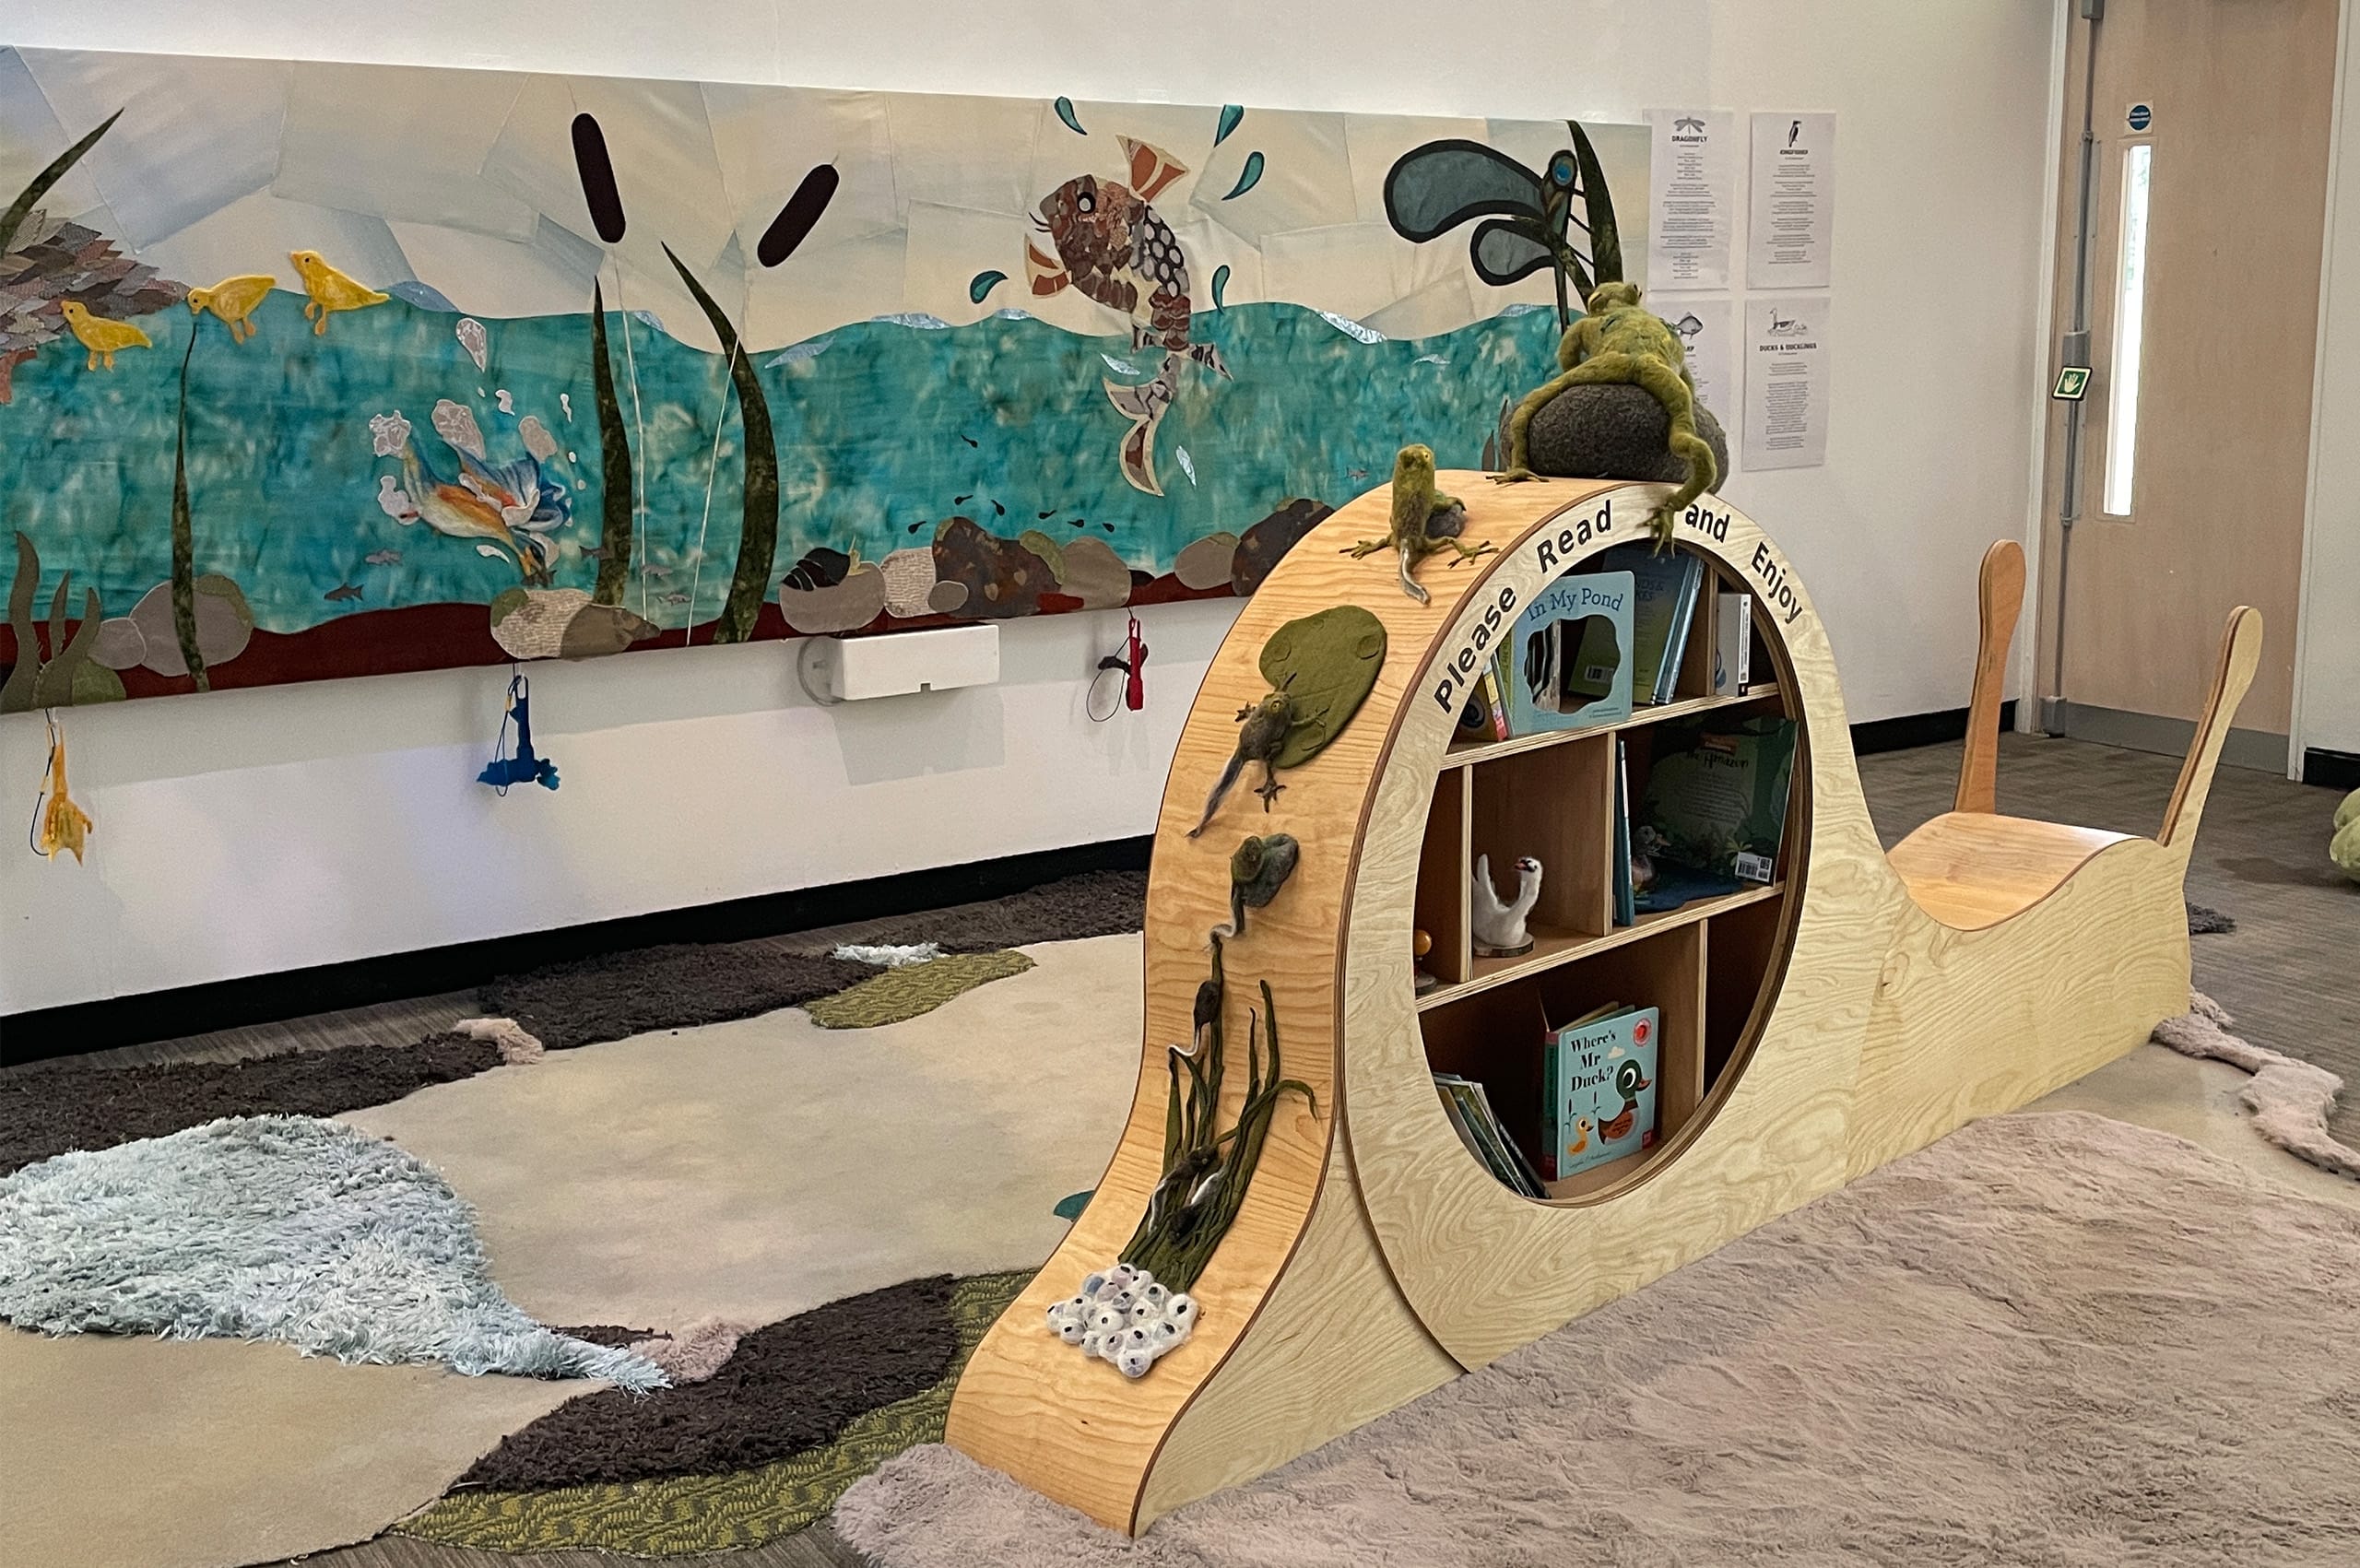 A gallery space with a reading snail in the foreground and a collage underwater scene on the wall.